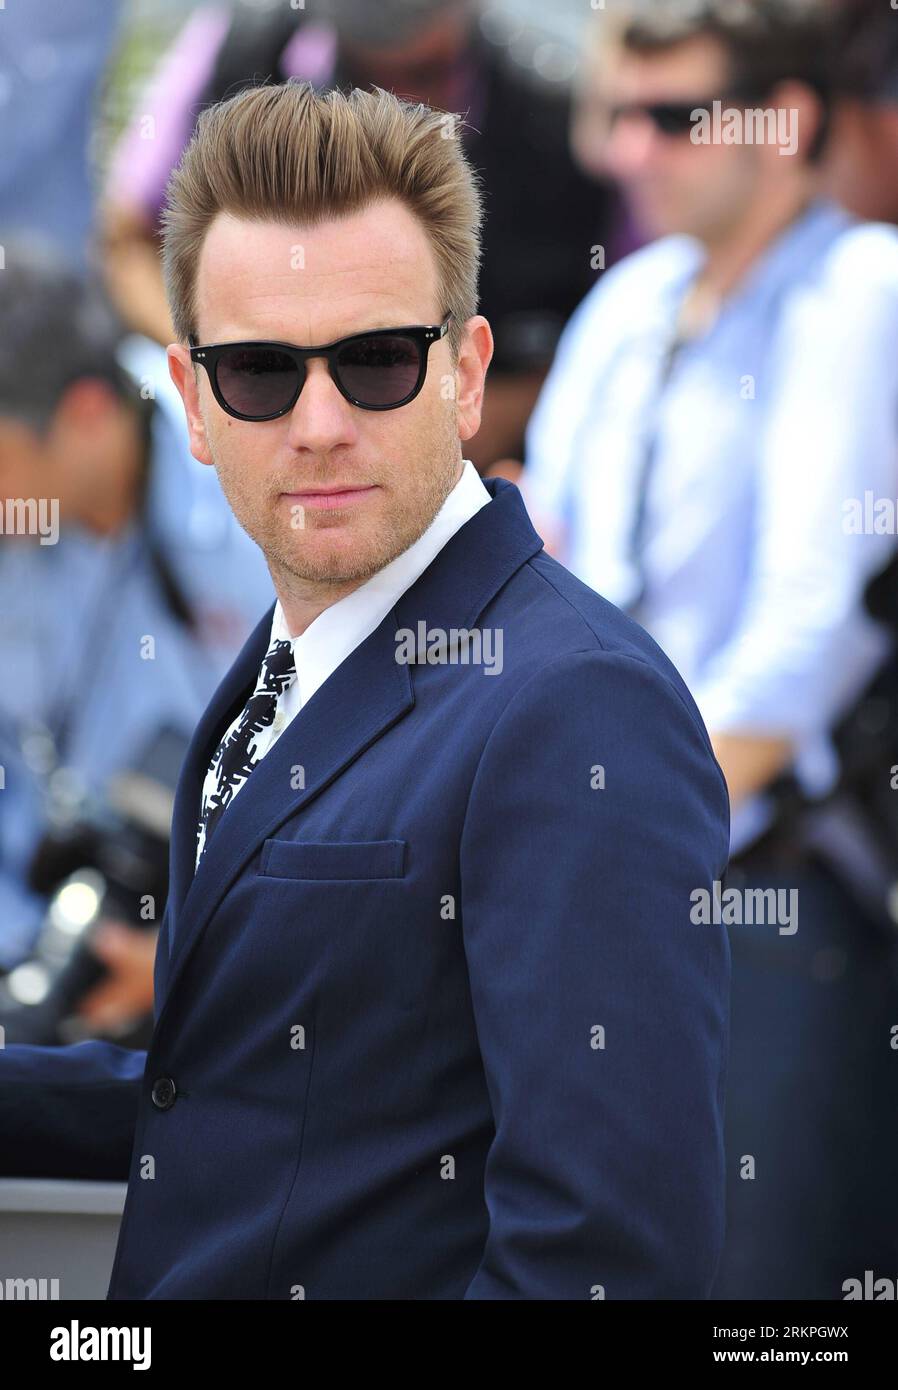 Bildnummer: 57995602  Datum: 16.05.2012  Copyright: imago/Xinhua (120516) -- CANNES, May 16, 2012 (Xinhua) -- The feature film jury of the 65th Cannes Film Festival, British actor Ewan Mc Gregor poses for photos during a photocall in Cannes, southern France, on May 16, 2012. The festival kicked off here on Wednesday. (Xinhua/Ye Pingfan) (zjl) RANCE-CANNES-FILM FESTIVAL-PHOTOCALL-JURY PUBLICATIONxNOTxINxCHN Kultur Entertainment People Film 65. Internationale Filmfestspiele Cannes Photocall Porträt x0x xst 2012 hoch Aufmacher premiumd      57995602 Date 16 05 2012 Copyright Imago XINHUA  Cannes Stock Photo